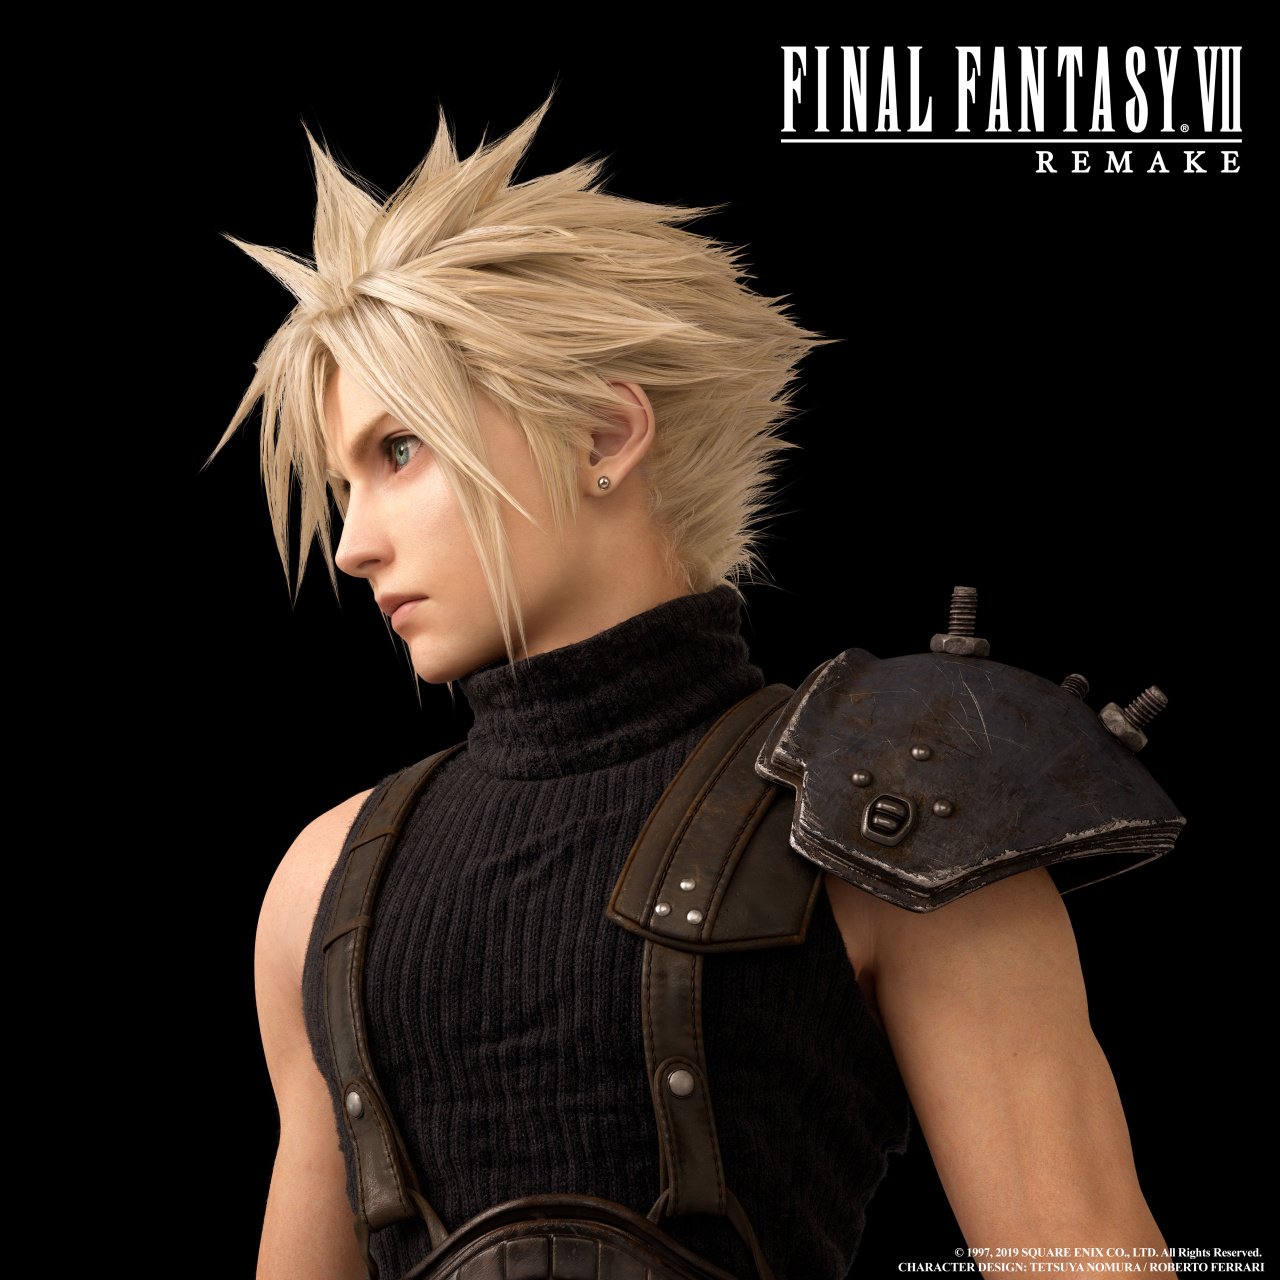 Gallery All Final Fantasy Vii Remake Character Art Push Square 2419